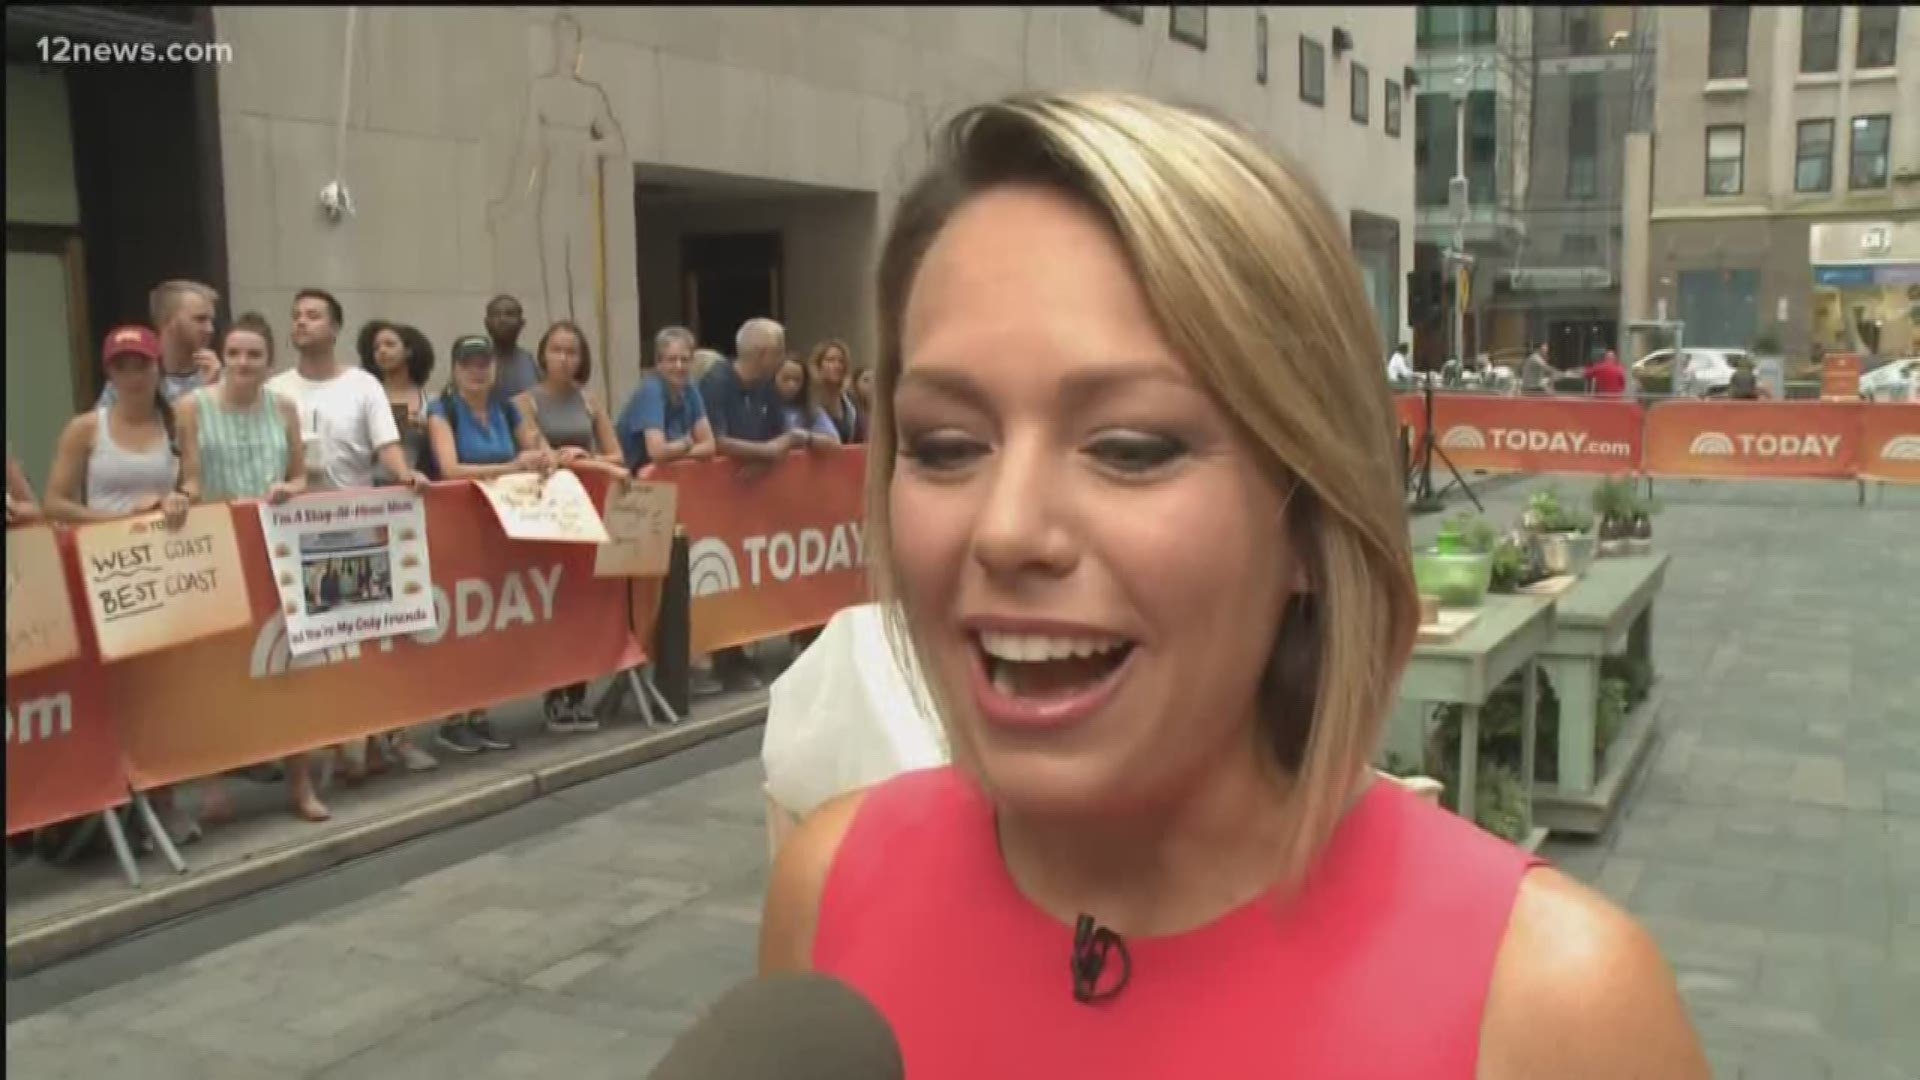 Back on the set of the Today Show with Dylan Dreyer sharing her daily schedule and mommy duty.